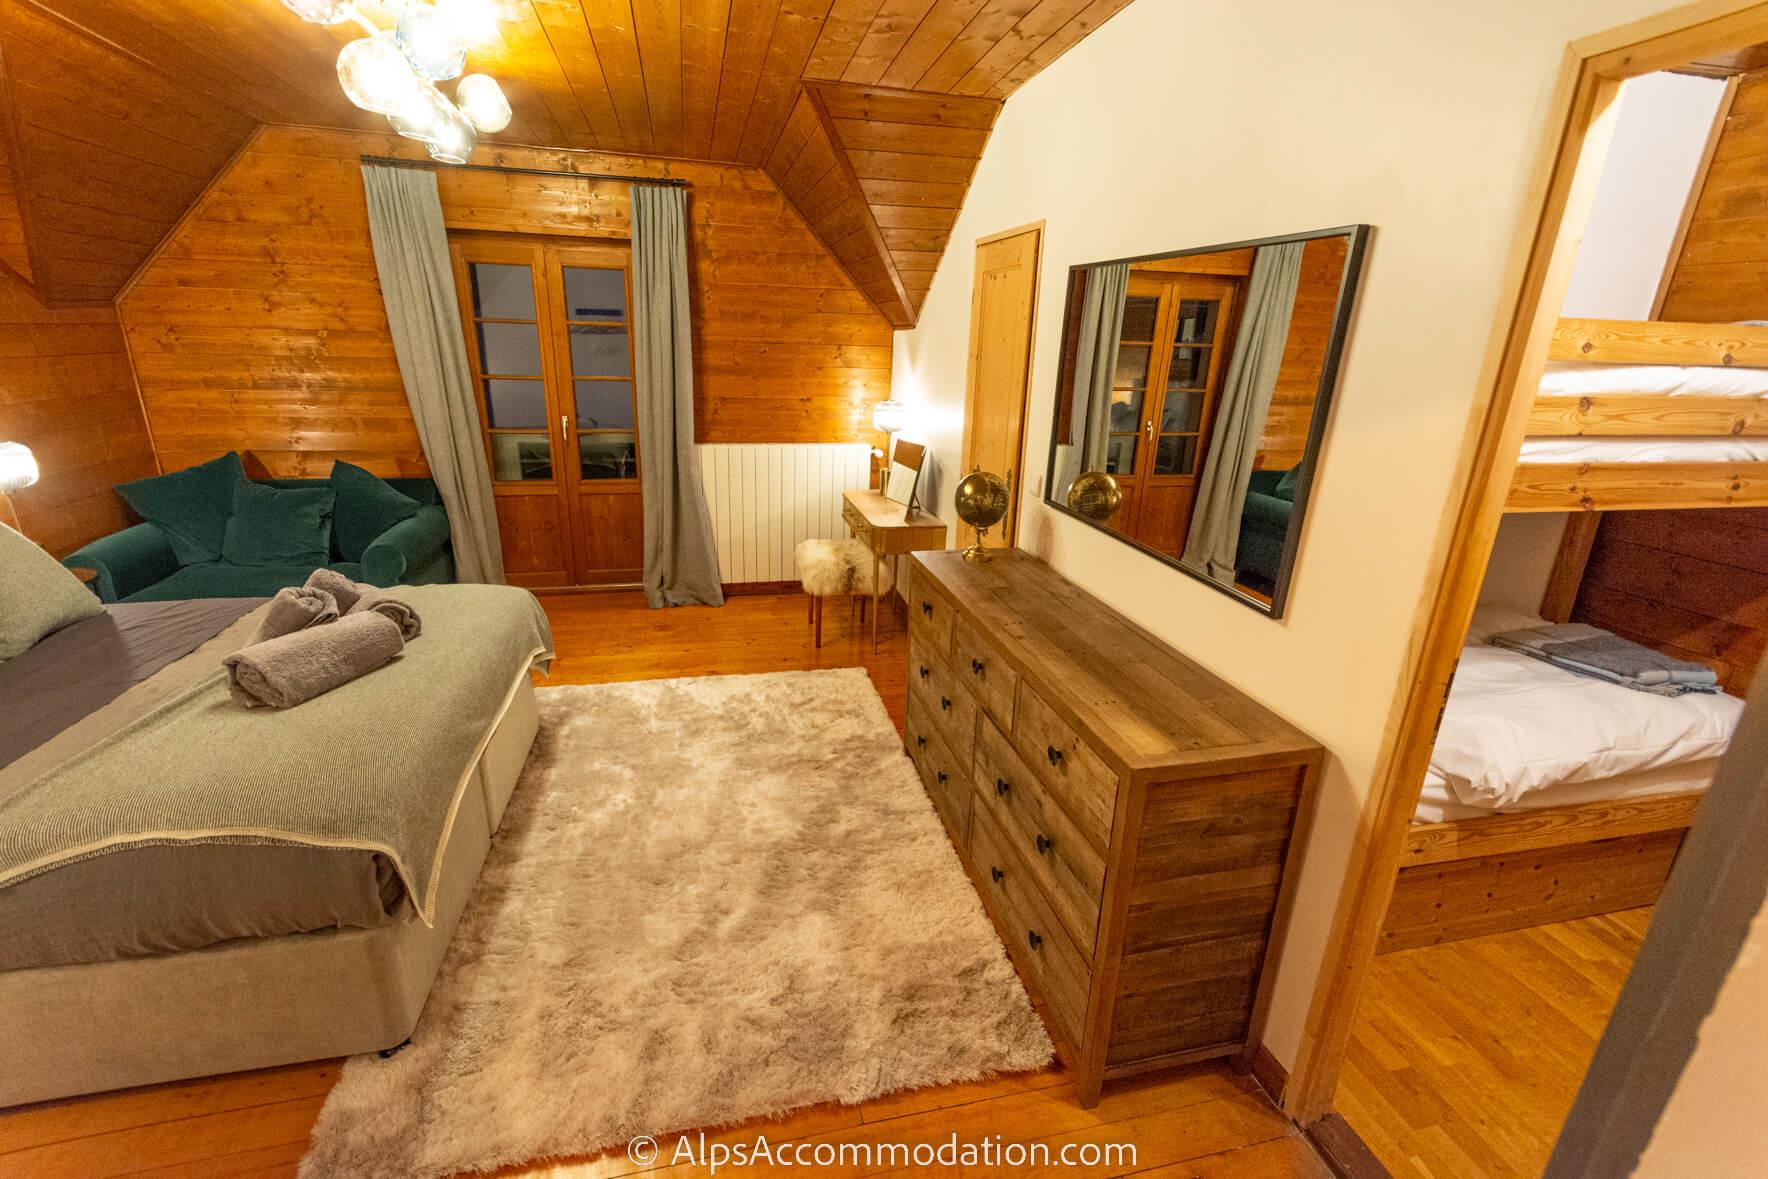 La Maison Blanche Samoëns - Spacious ensuite family bedroom with separate bunk bedroom off the main bedroom